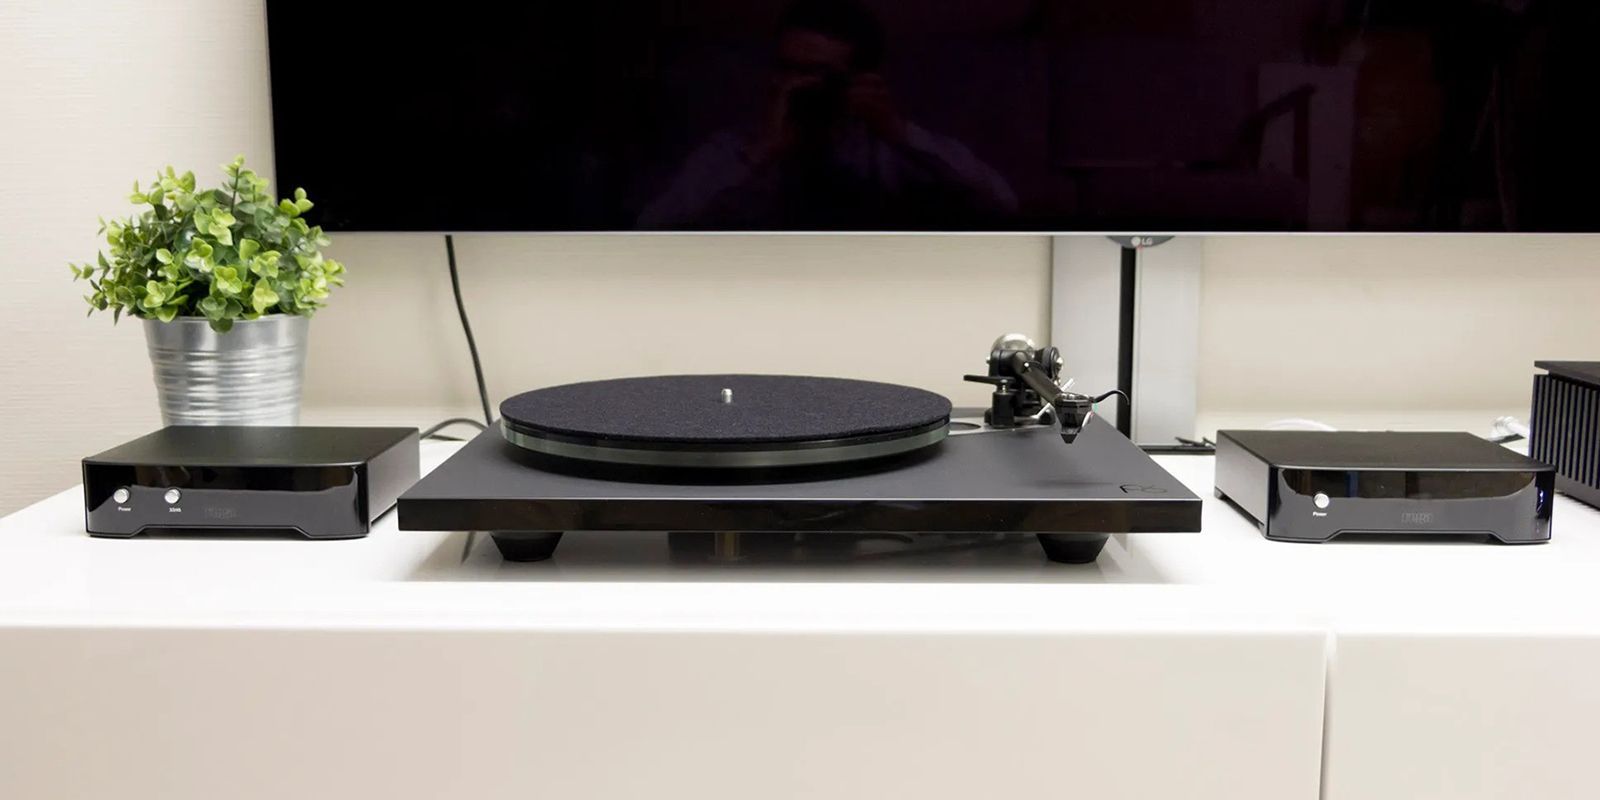 Rega planar 6 turntable on a white table surrounded by Hi-Fi accessories and wall-mounted tv